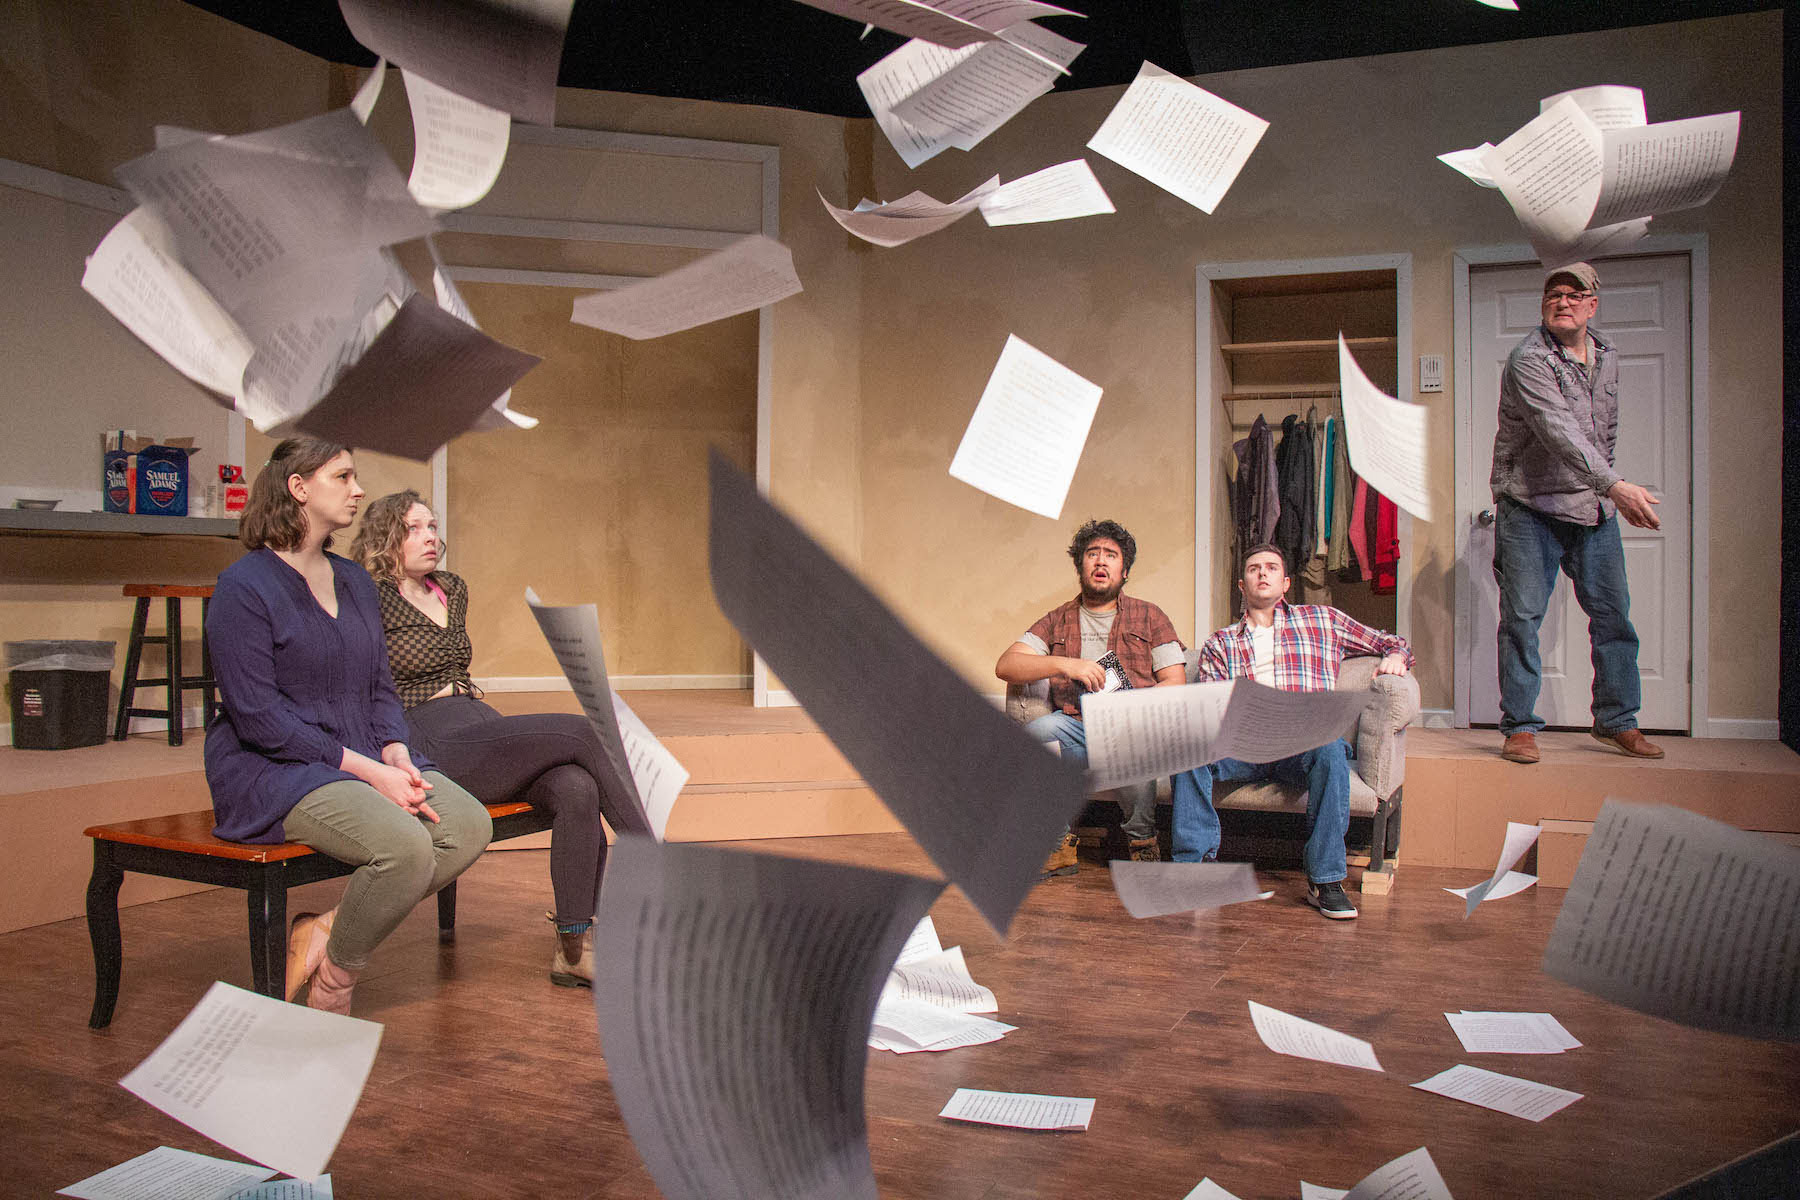 People sit in a room filled with falling papers